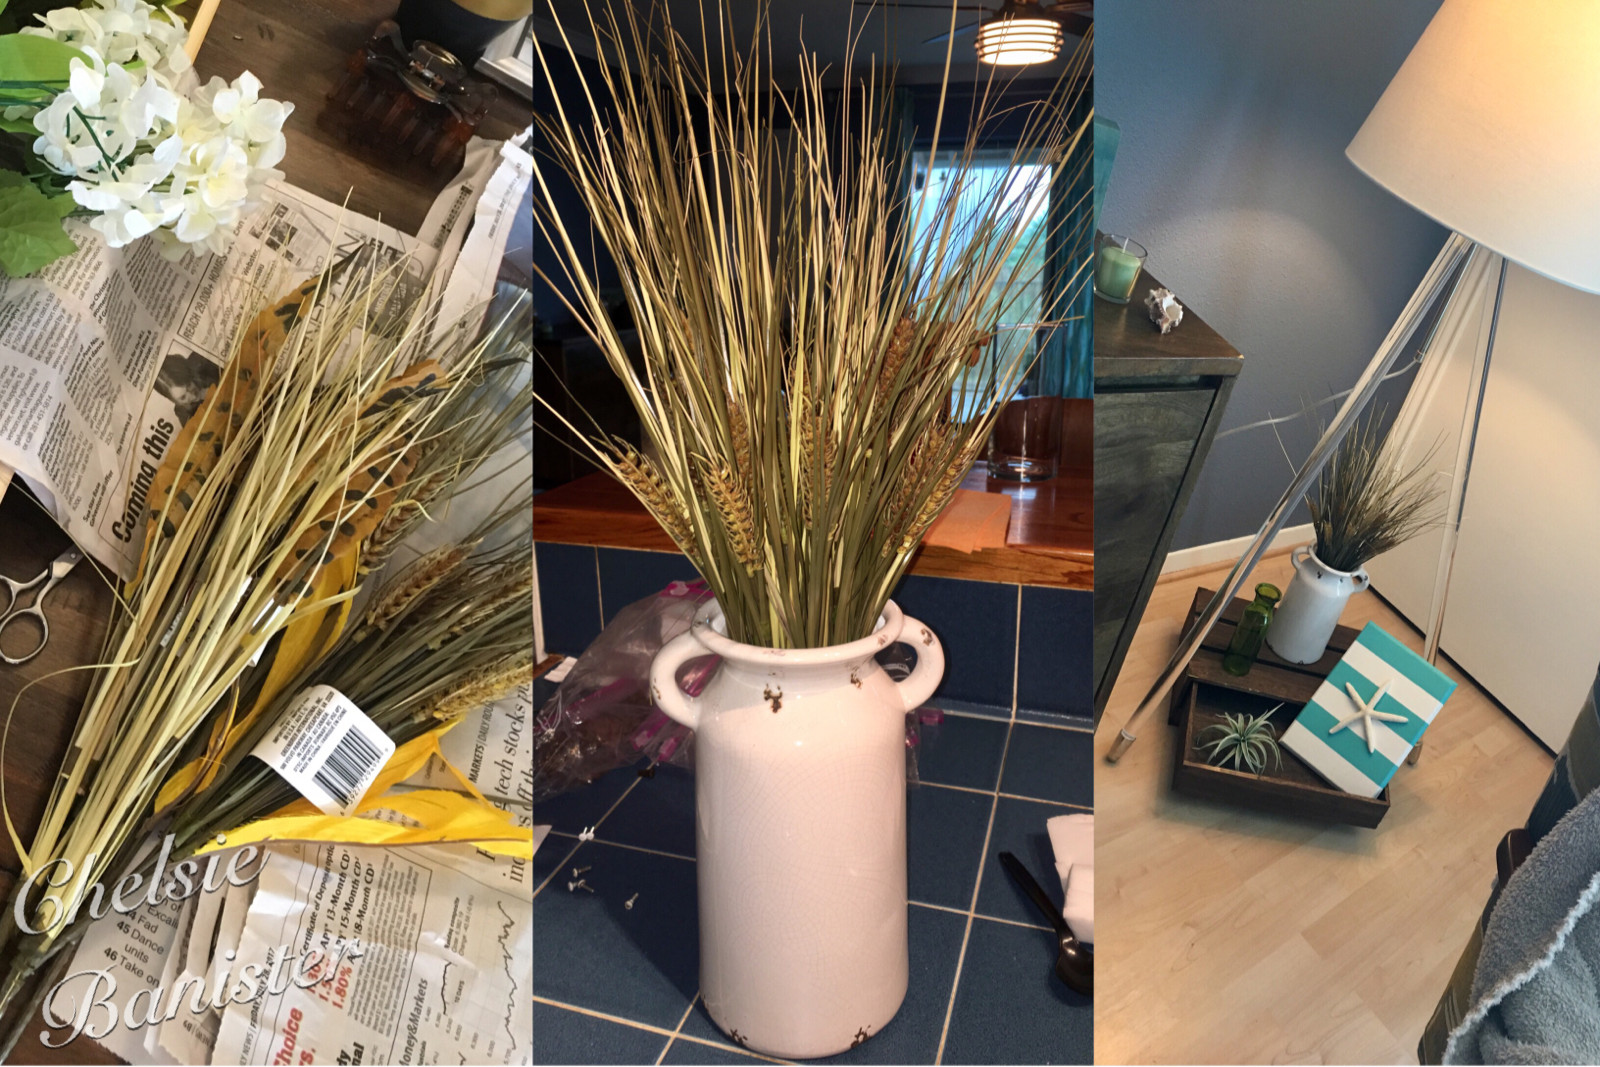 10 Trendy Bulk Vases Dollar Tree 2023 free download bulk vases dollar tree of wheat branches from dollar store cut the yellow feathers off milk throughout wheat branches from dollar store cut the yellow feathers off milk jug vase from